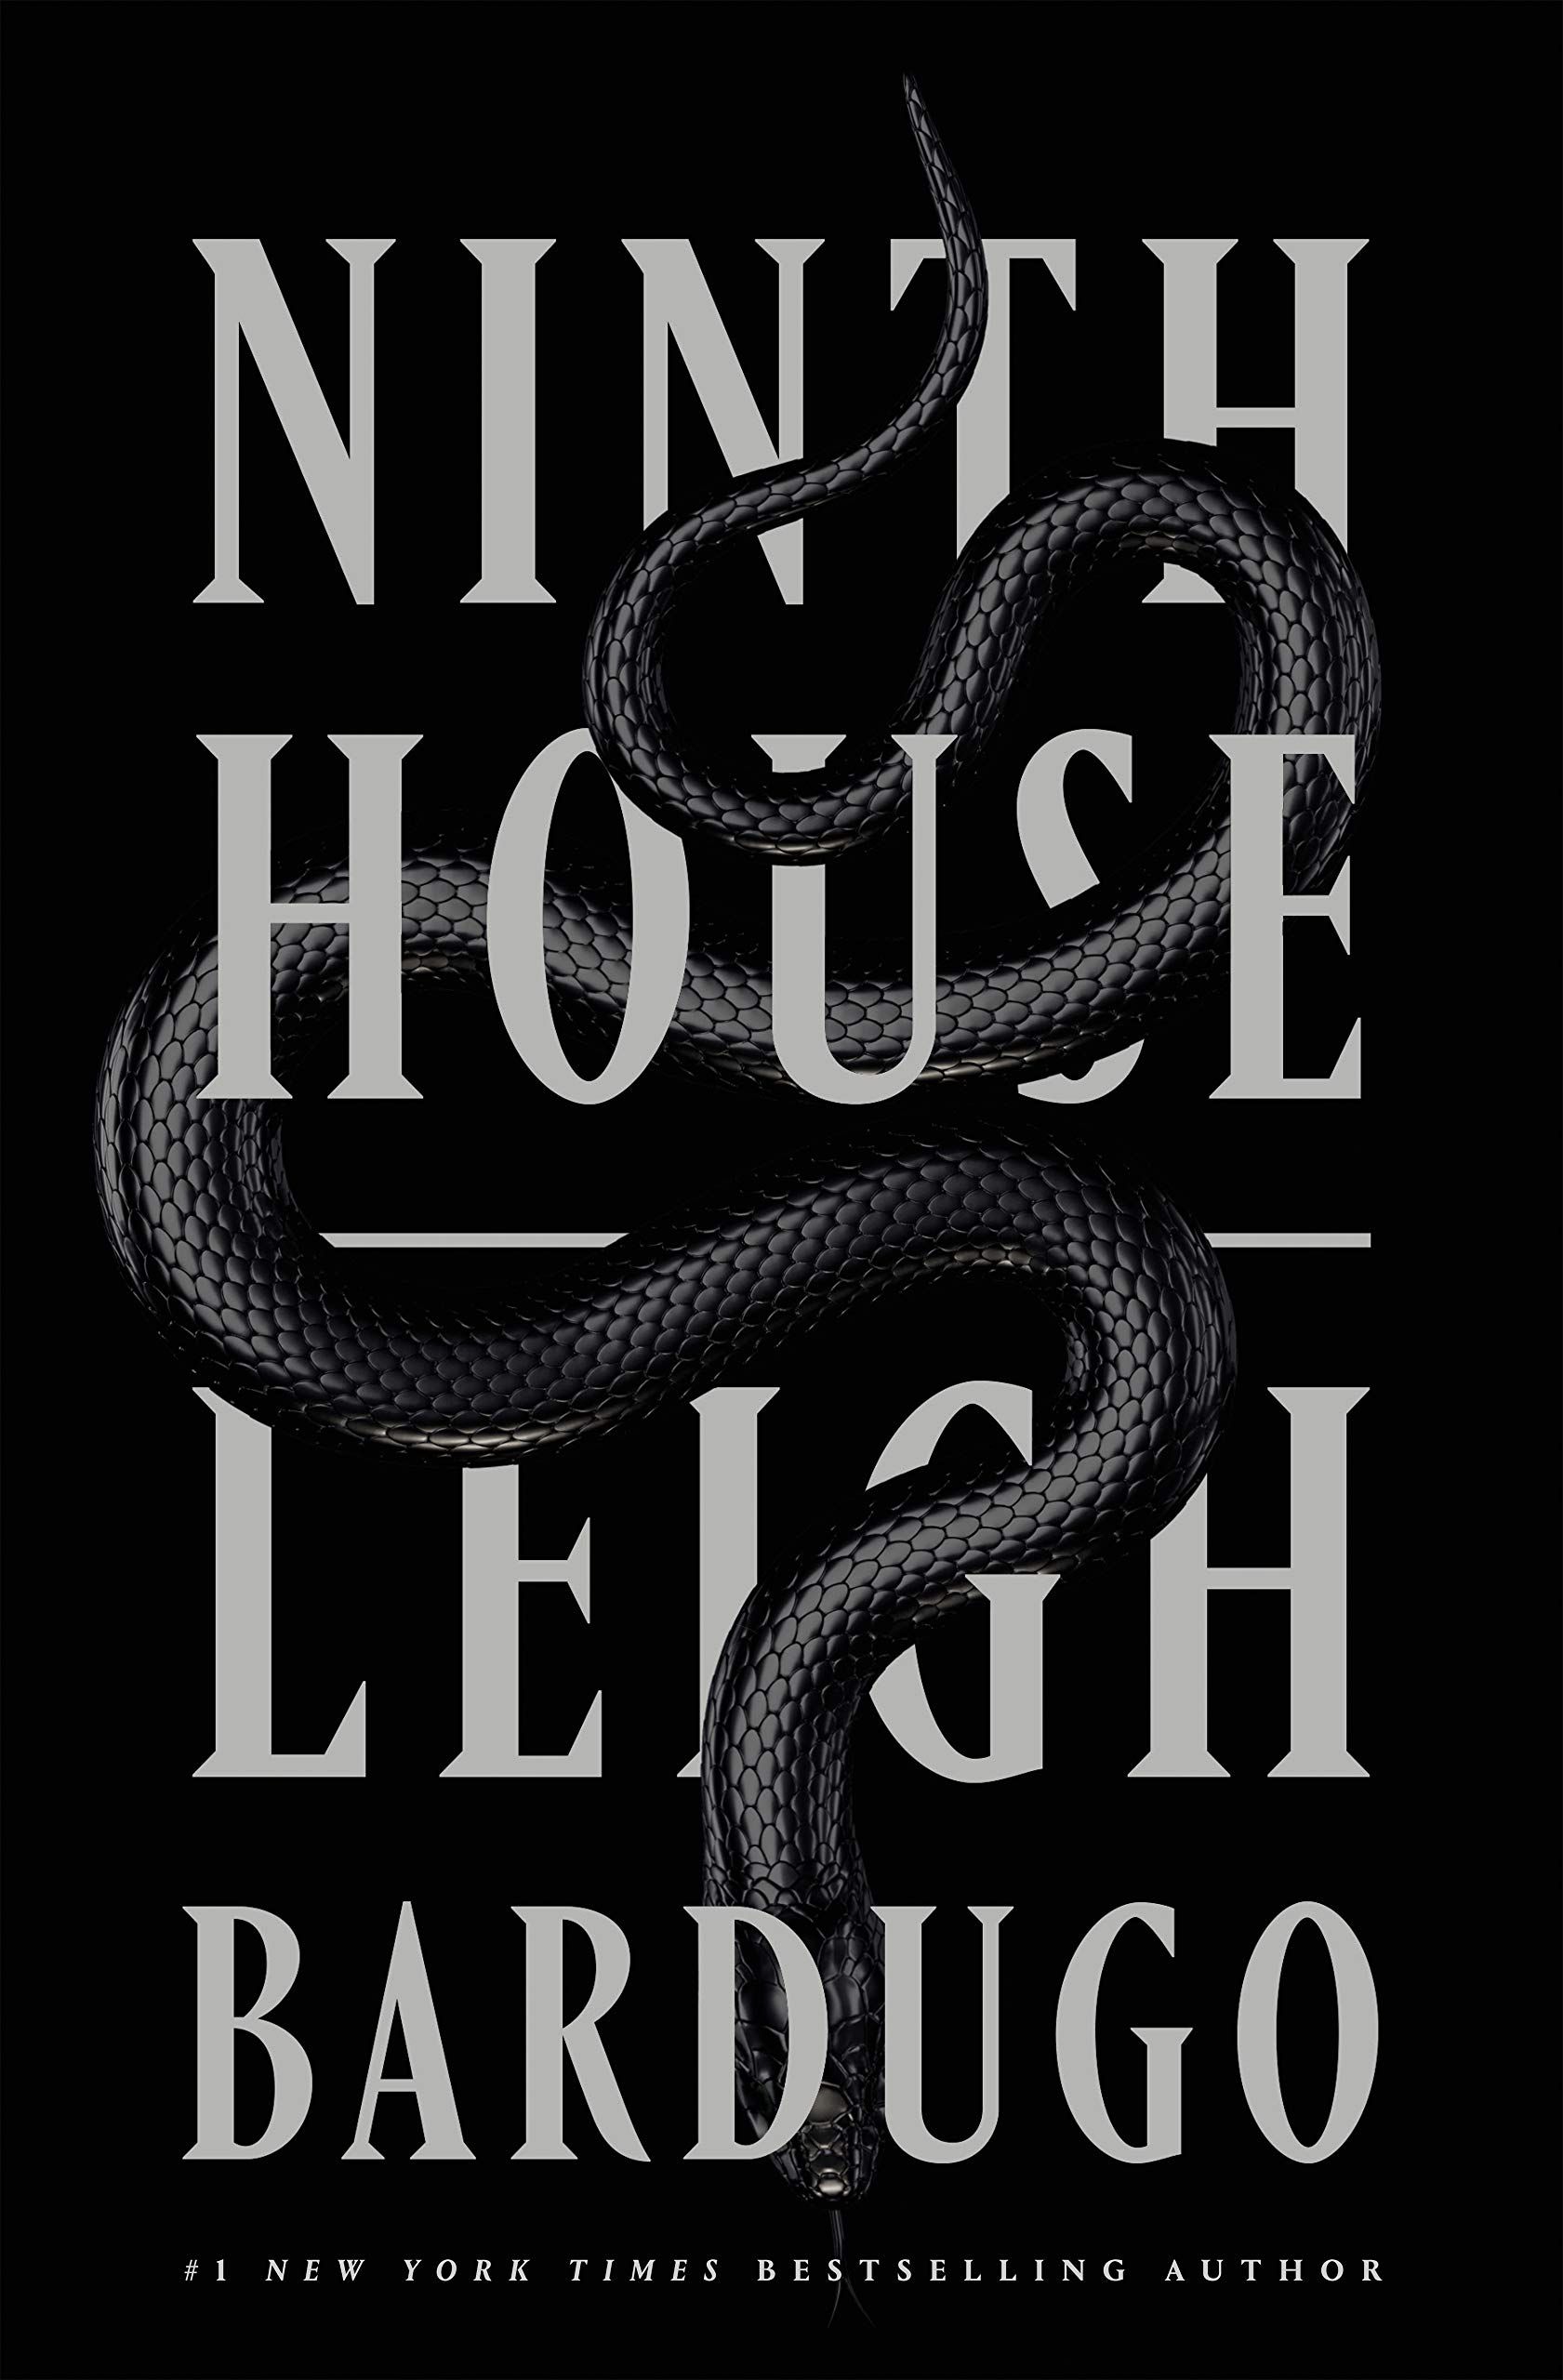 Cover image of Ninth House by Leigh Bardugo